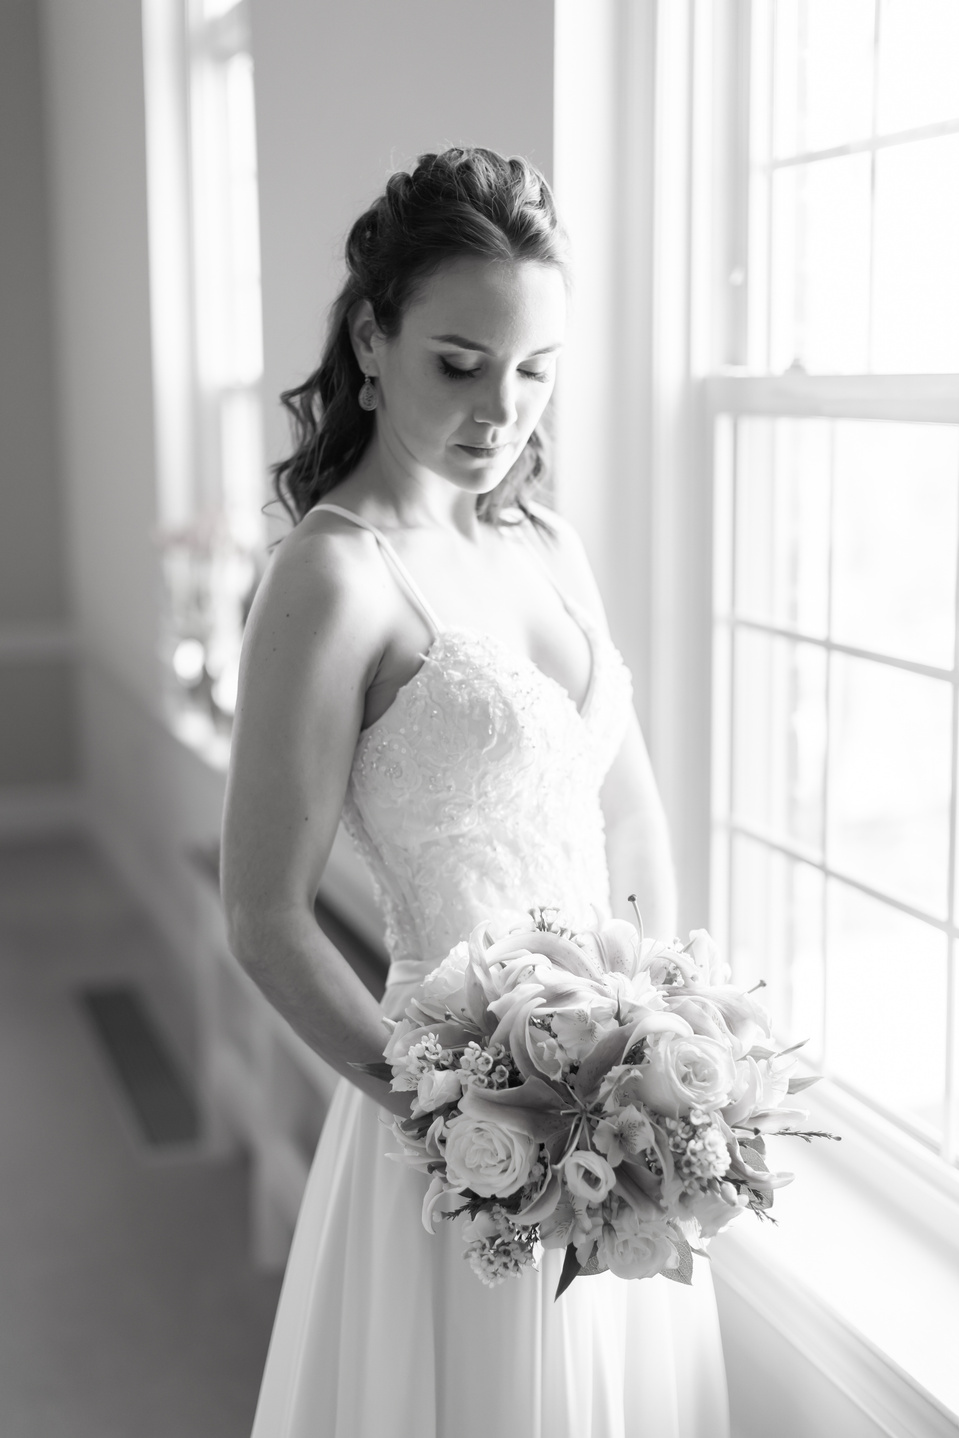 A bride stood next to a window looking down at her wedding bouquet, with sunlight illuminating.  